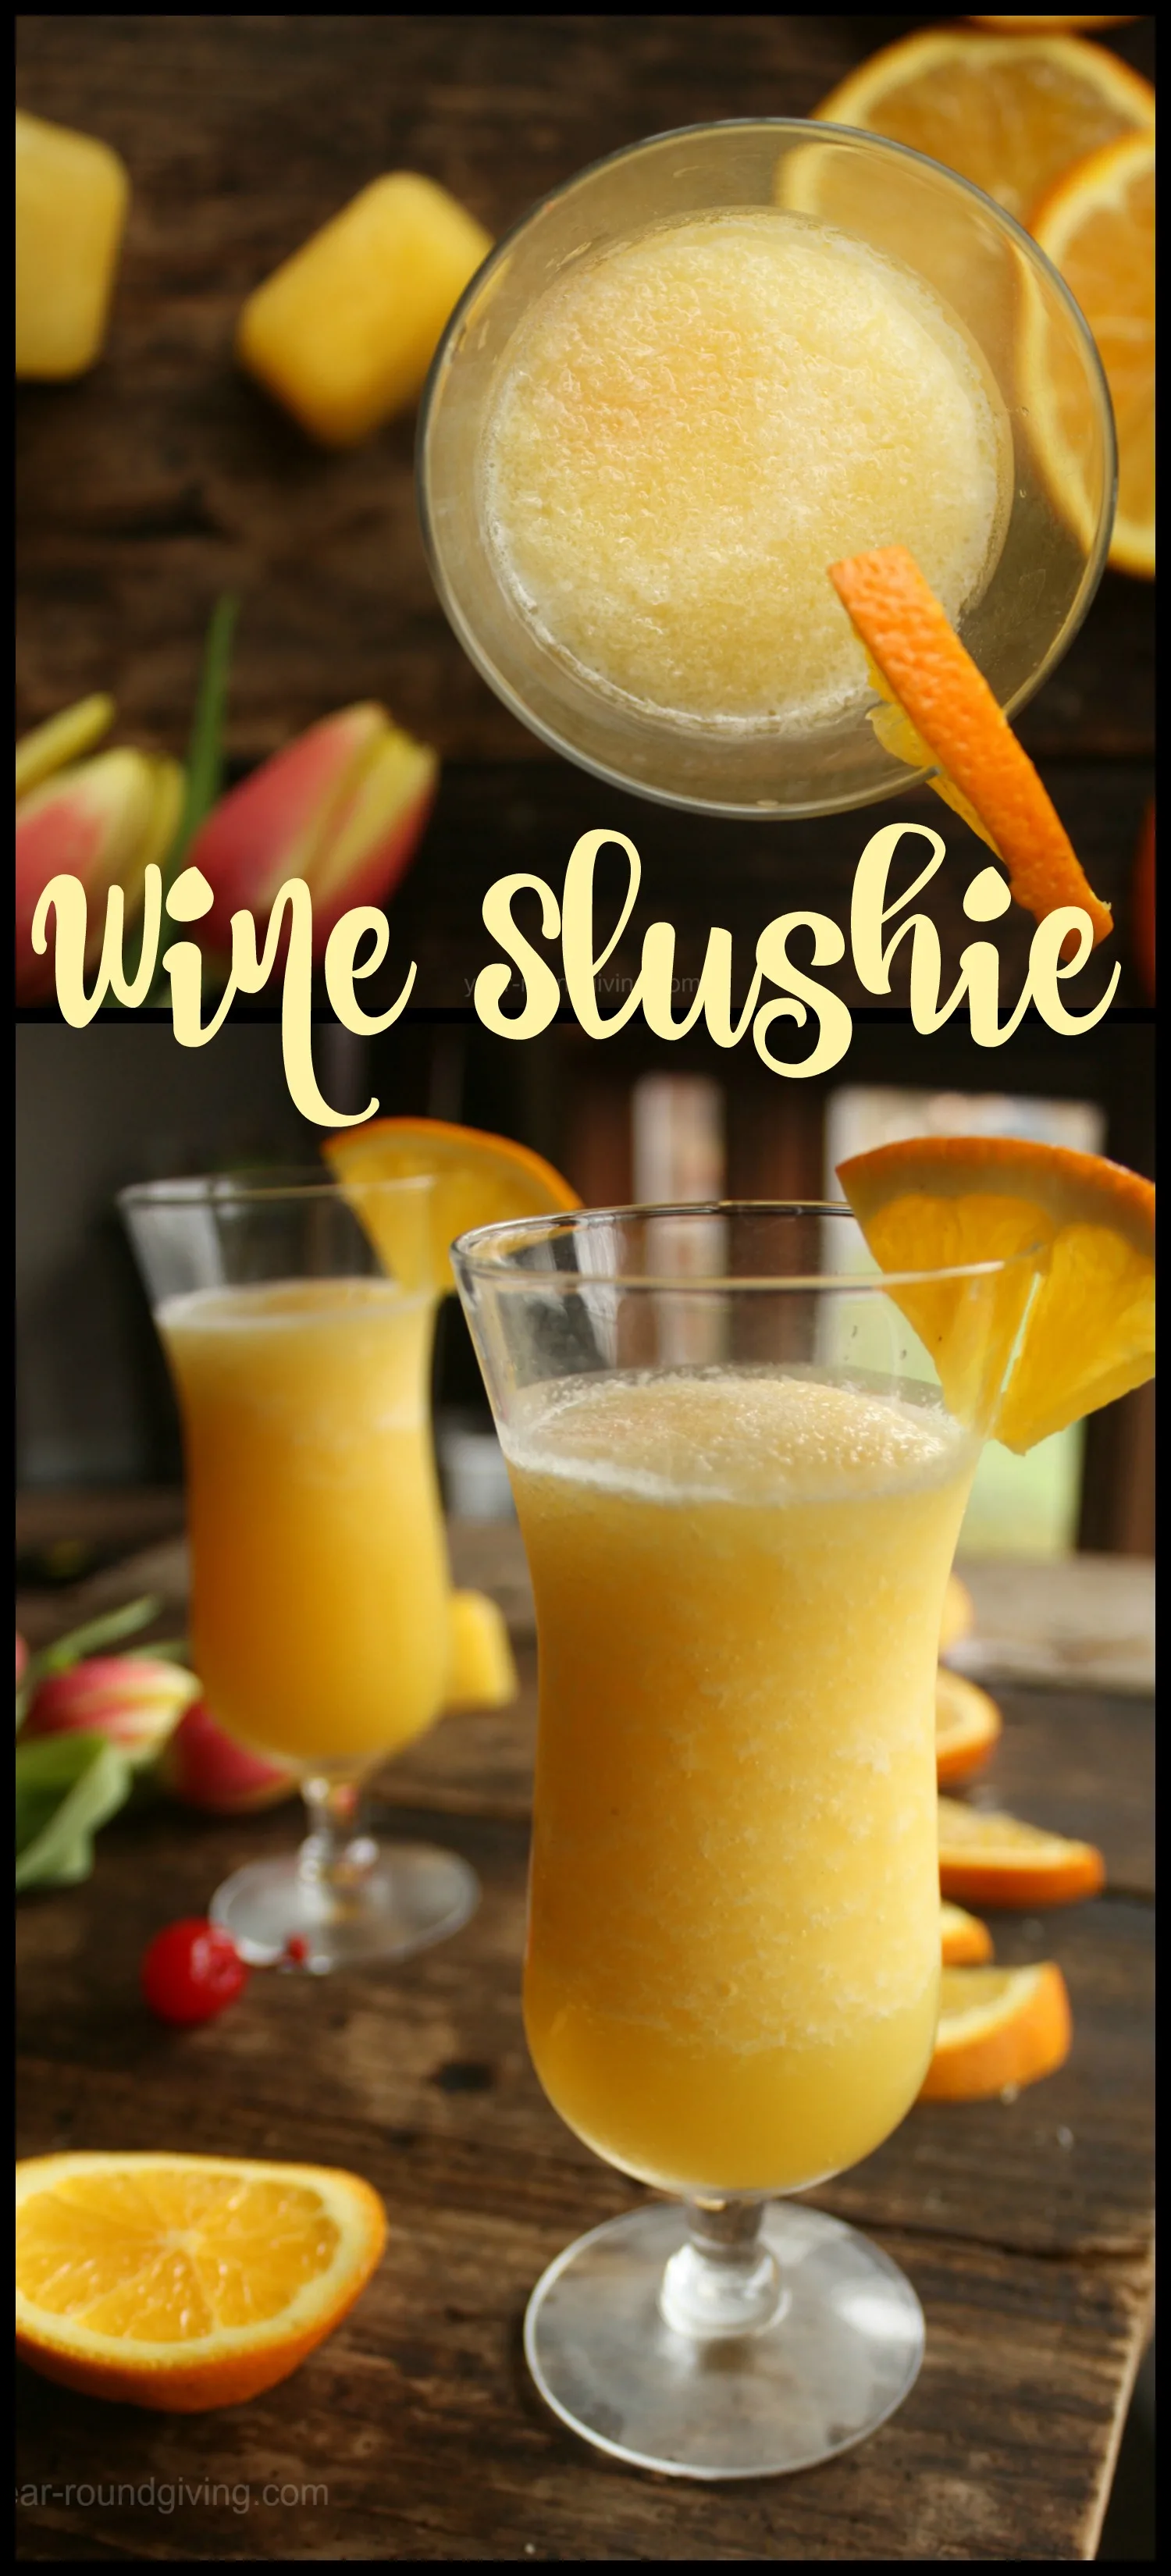 A tropical wine slushie! The Pinot Slush is a wine slushie with Pinot Grigio and Grand Marnier blended with frozen fruit juices.